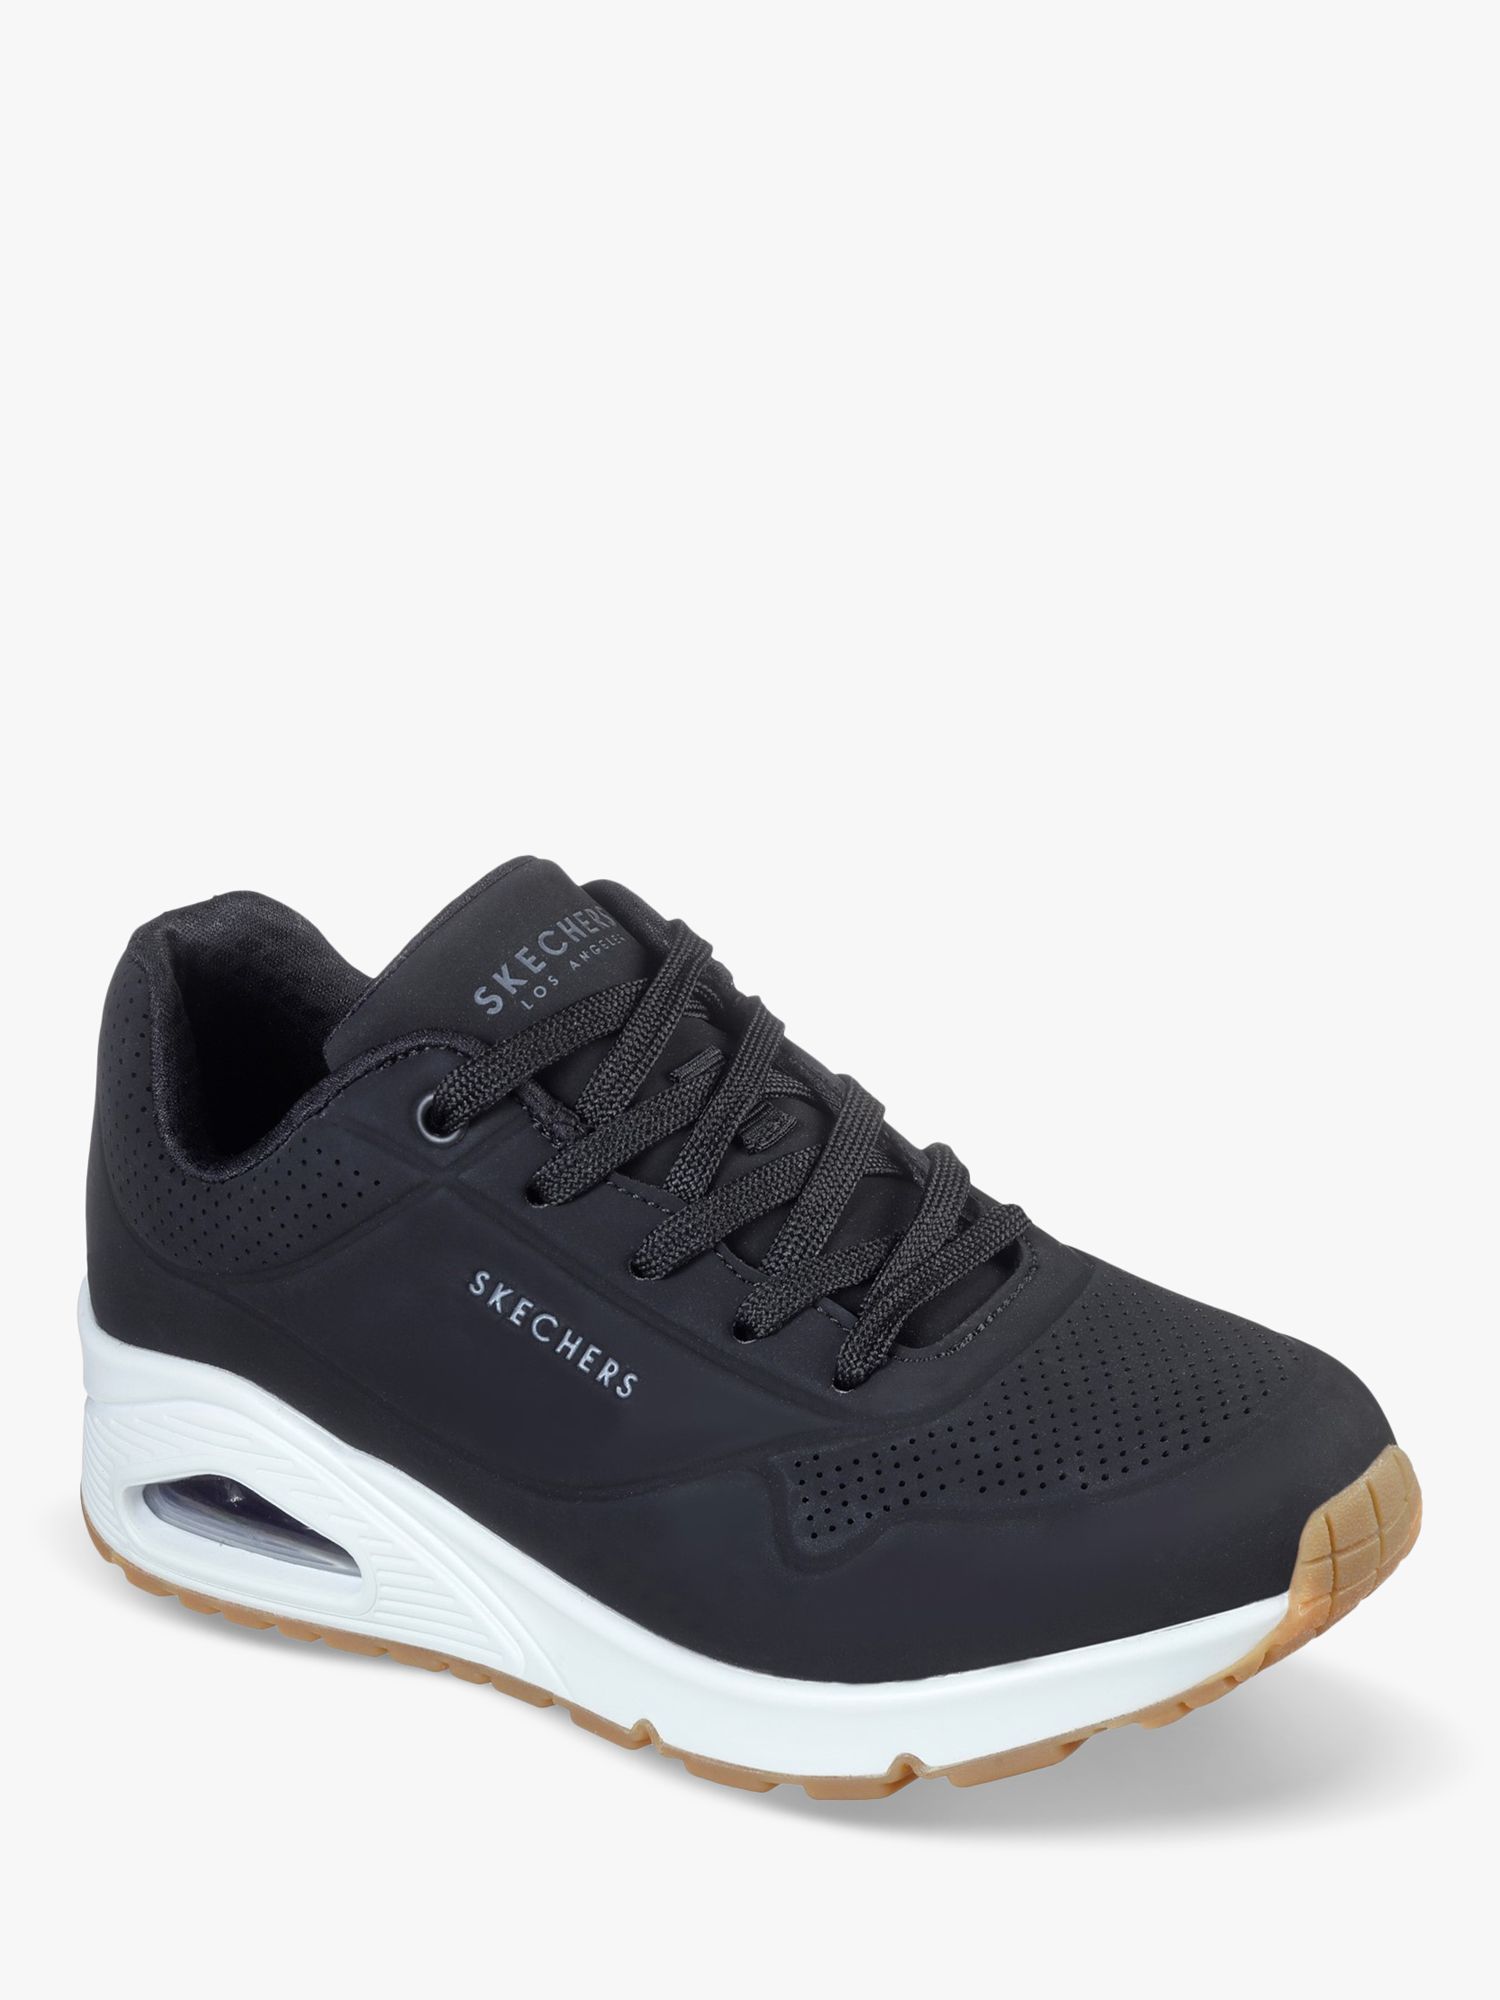 Buy Skechers Uno Stand On Air Sports Trainers Online at johnlewis.com